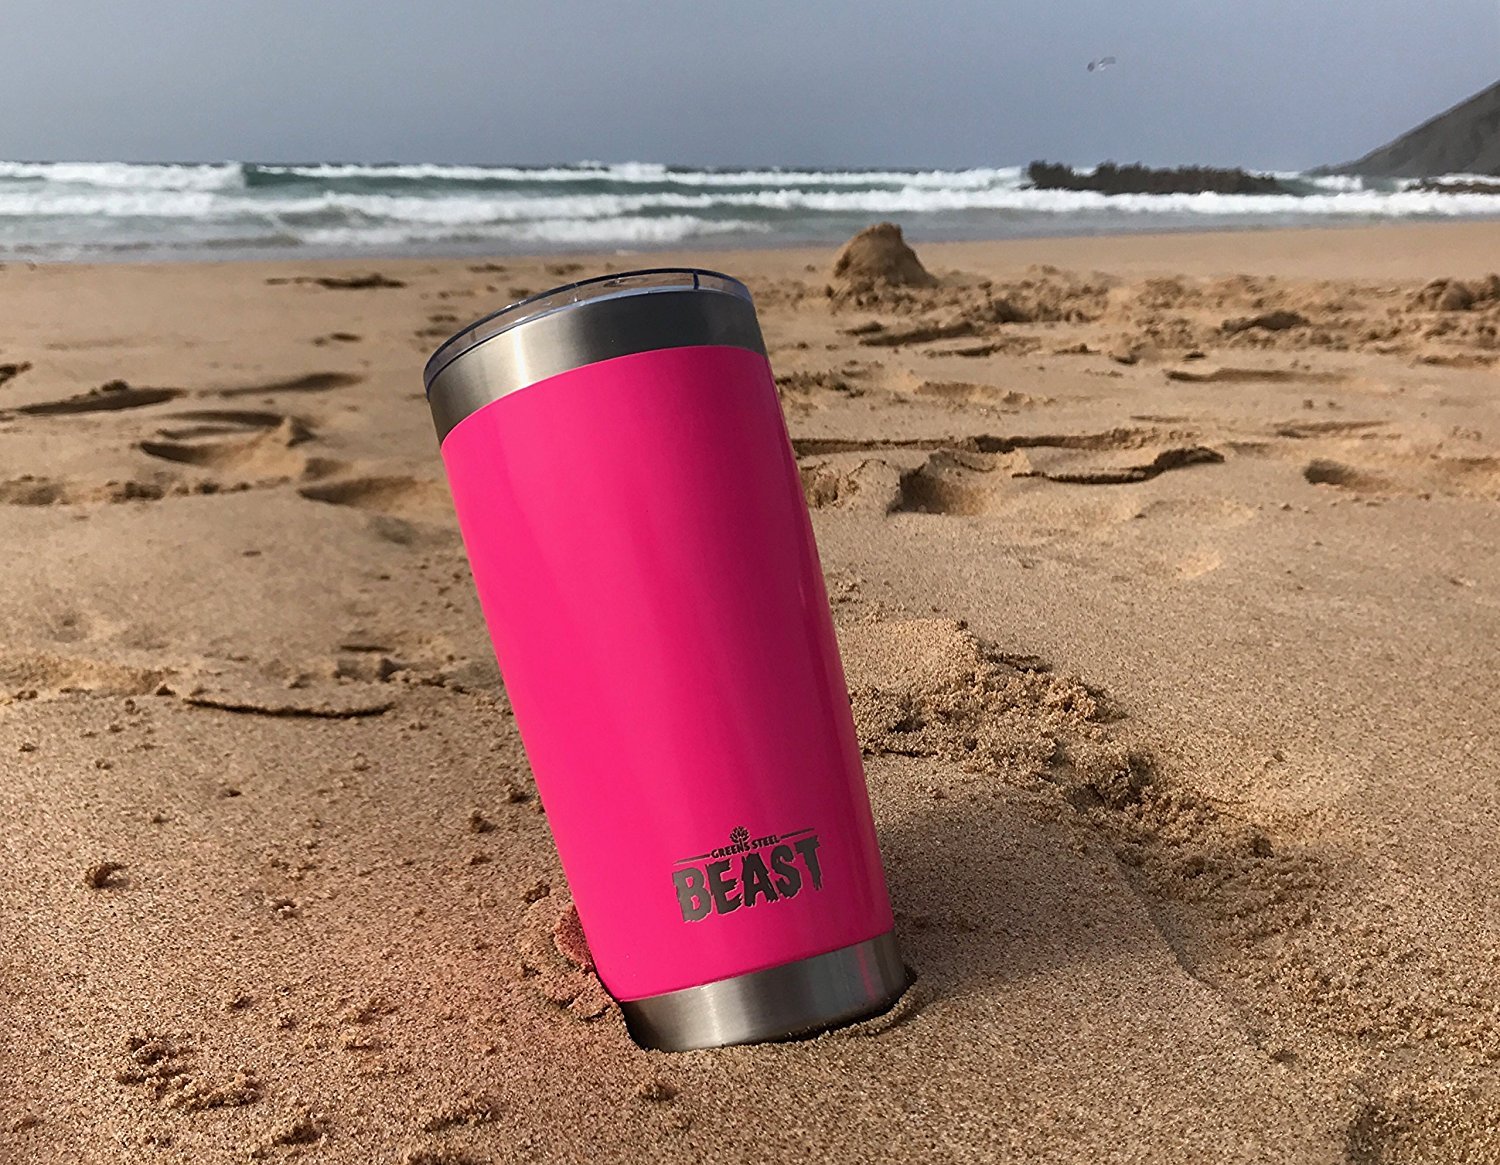 Greens Steel - Our Hot Pink 40oz Beast Tumbler is the